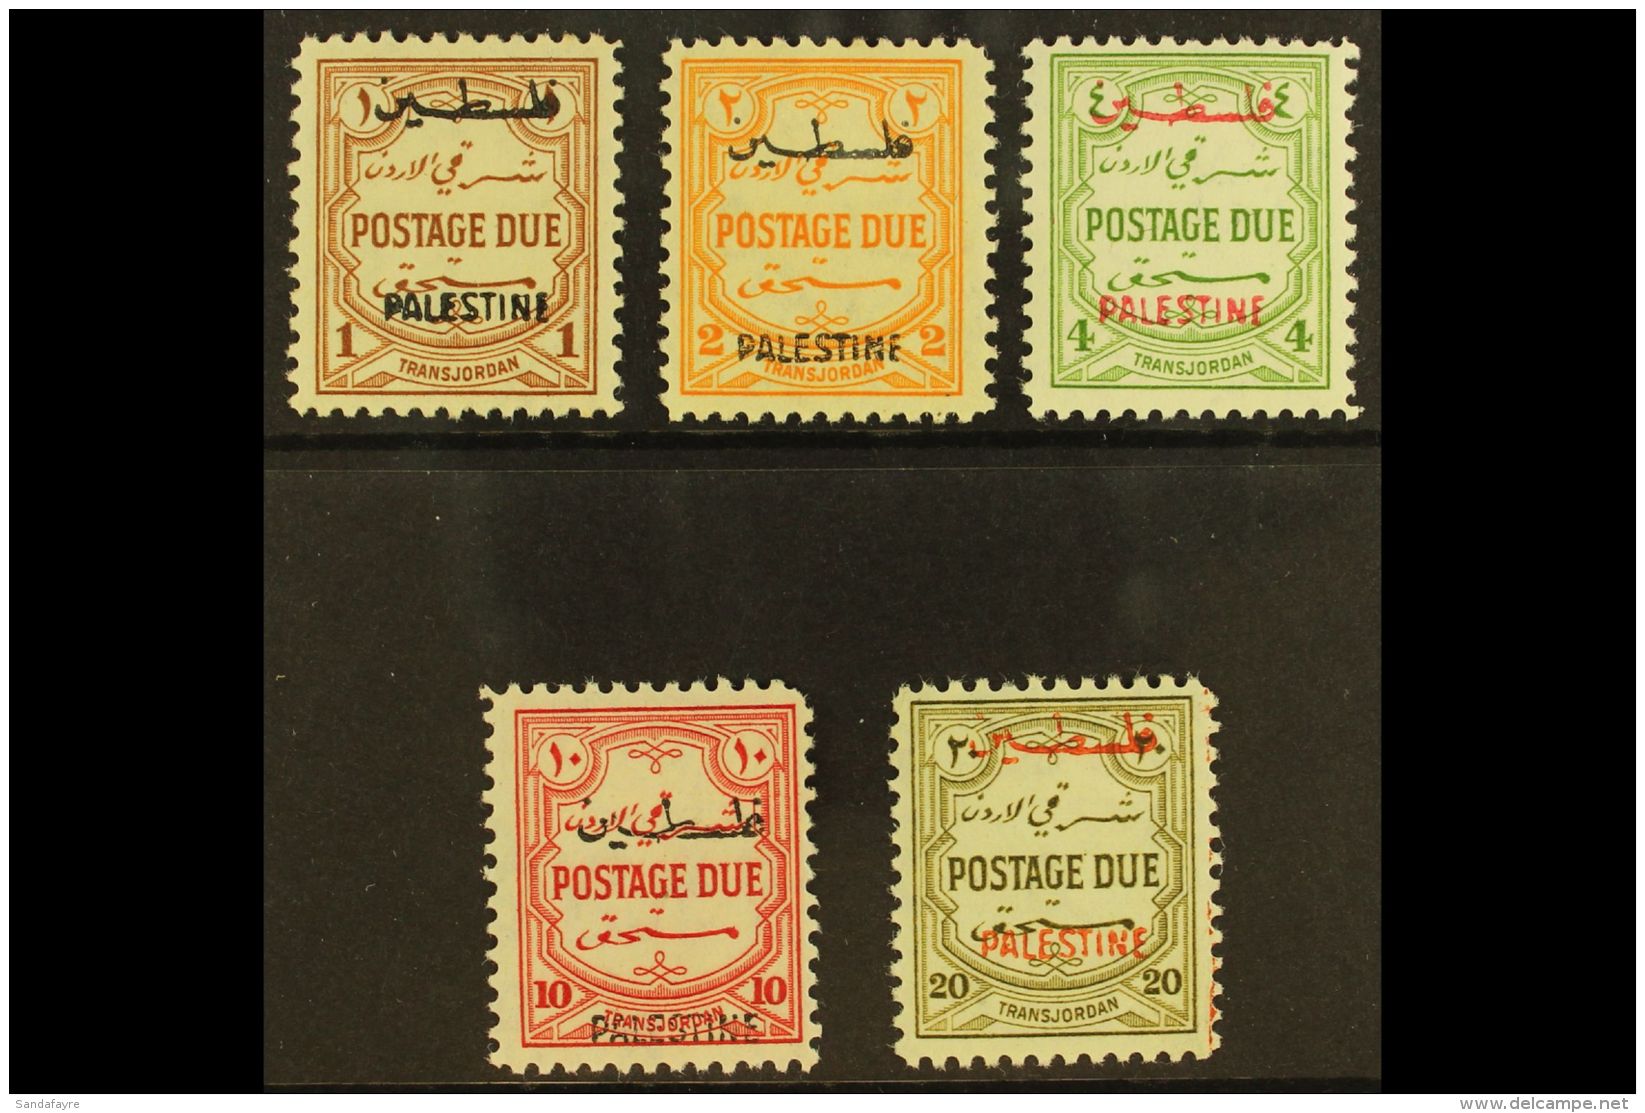 OCCUPATION OF PALESTINE 1948 Postage Due Set, Perf 12, Complete, SG PD25/9, Very Fine And Fresh Mint. (5 Stamps)... - Jordanie